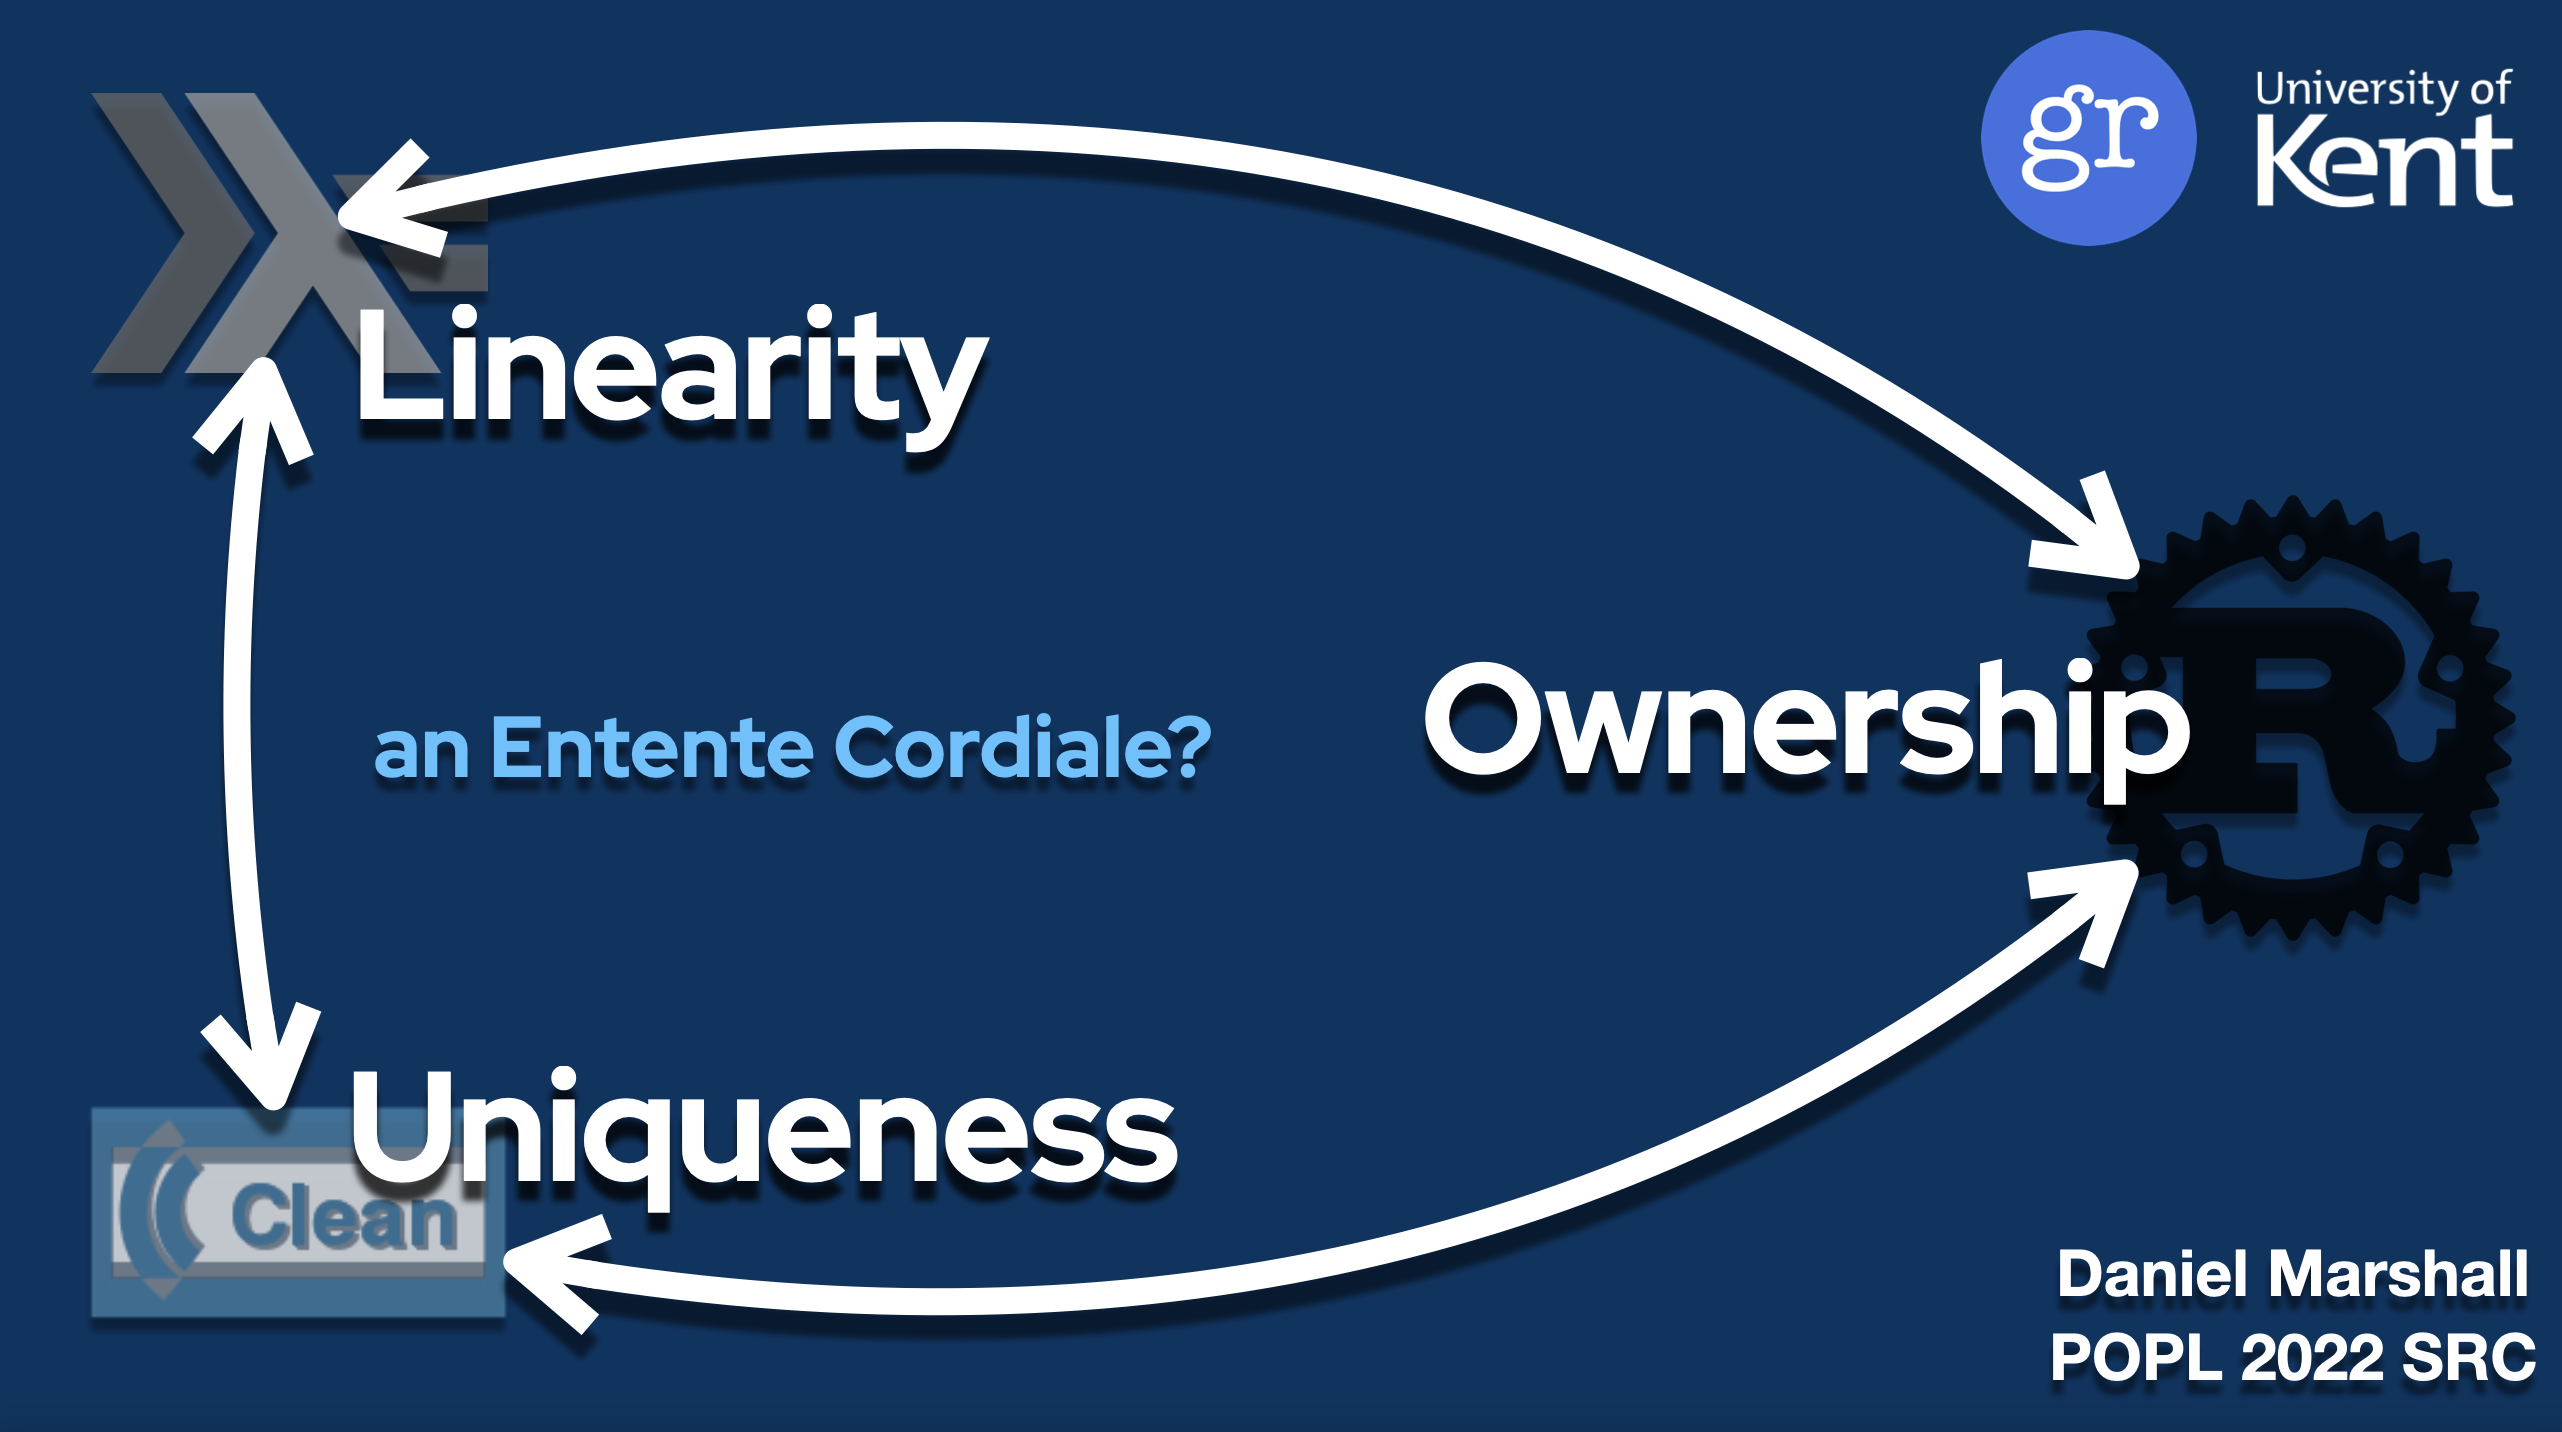 Project: Linearity, Uniqueness, Ownership: An Entente Cordiale